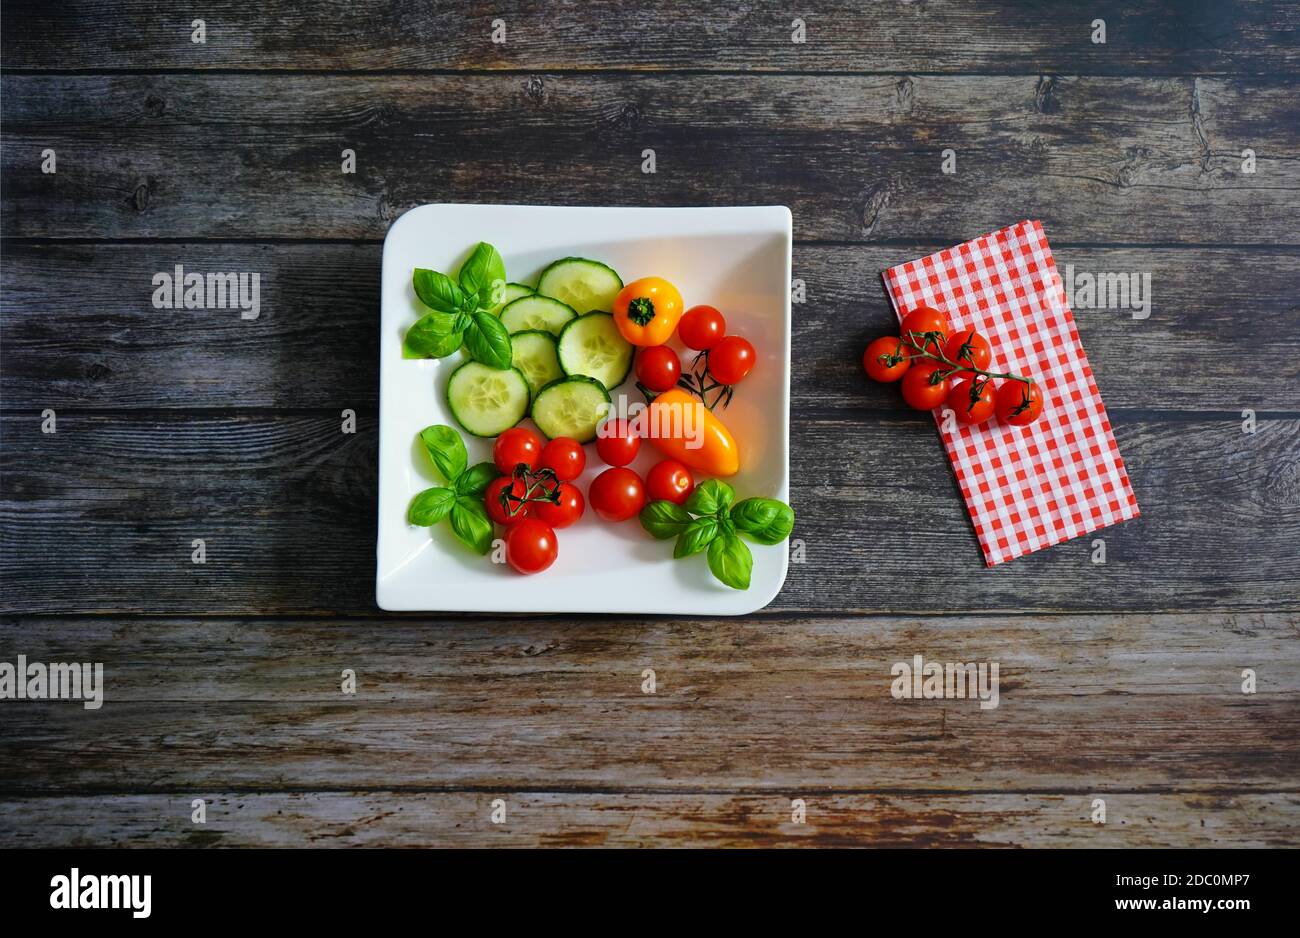 Fresh ingredients for a healthy salad on a white square plate: Tomatoes, bell pepper, zucchini and basil. Dark wooden background with checked napkin. Stock Photo